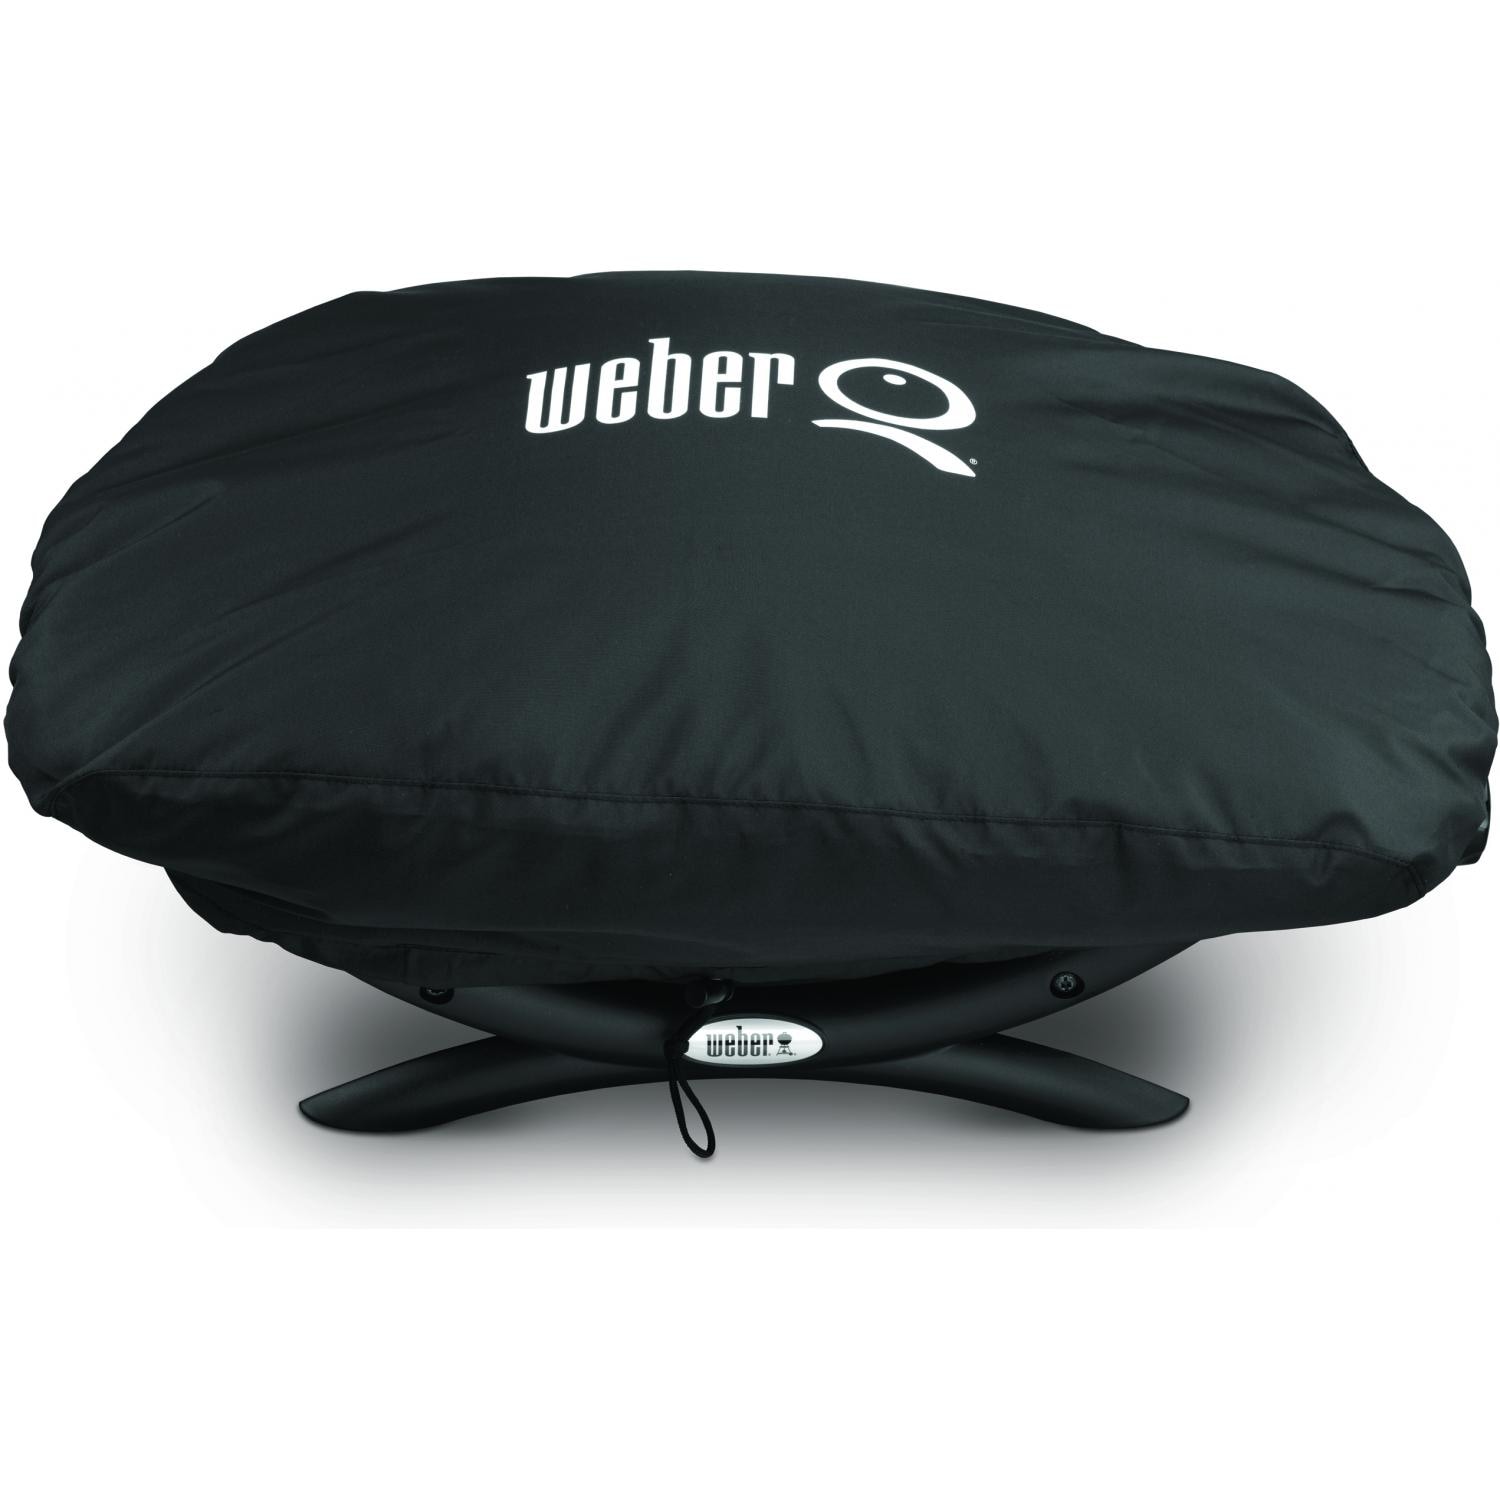 Weber Q Series Bonnet Grill Cover - image 1 of 3